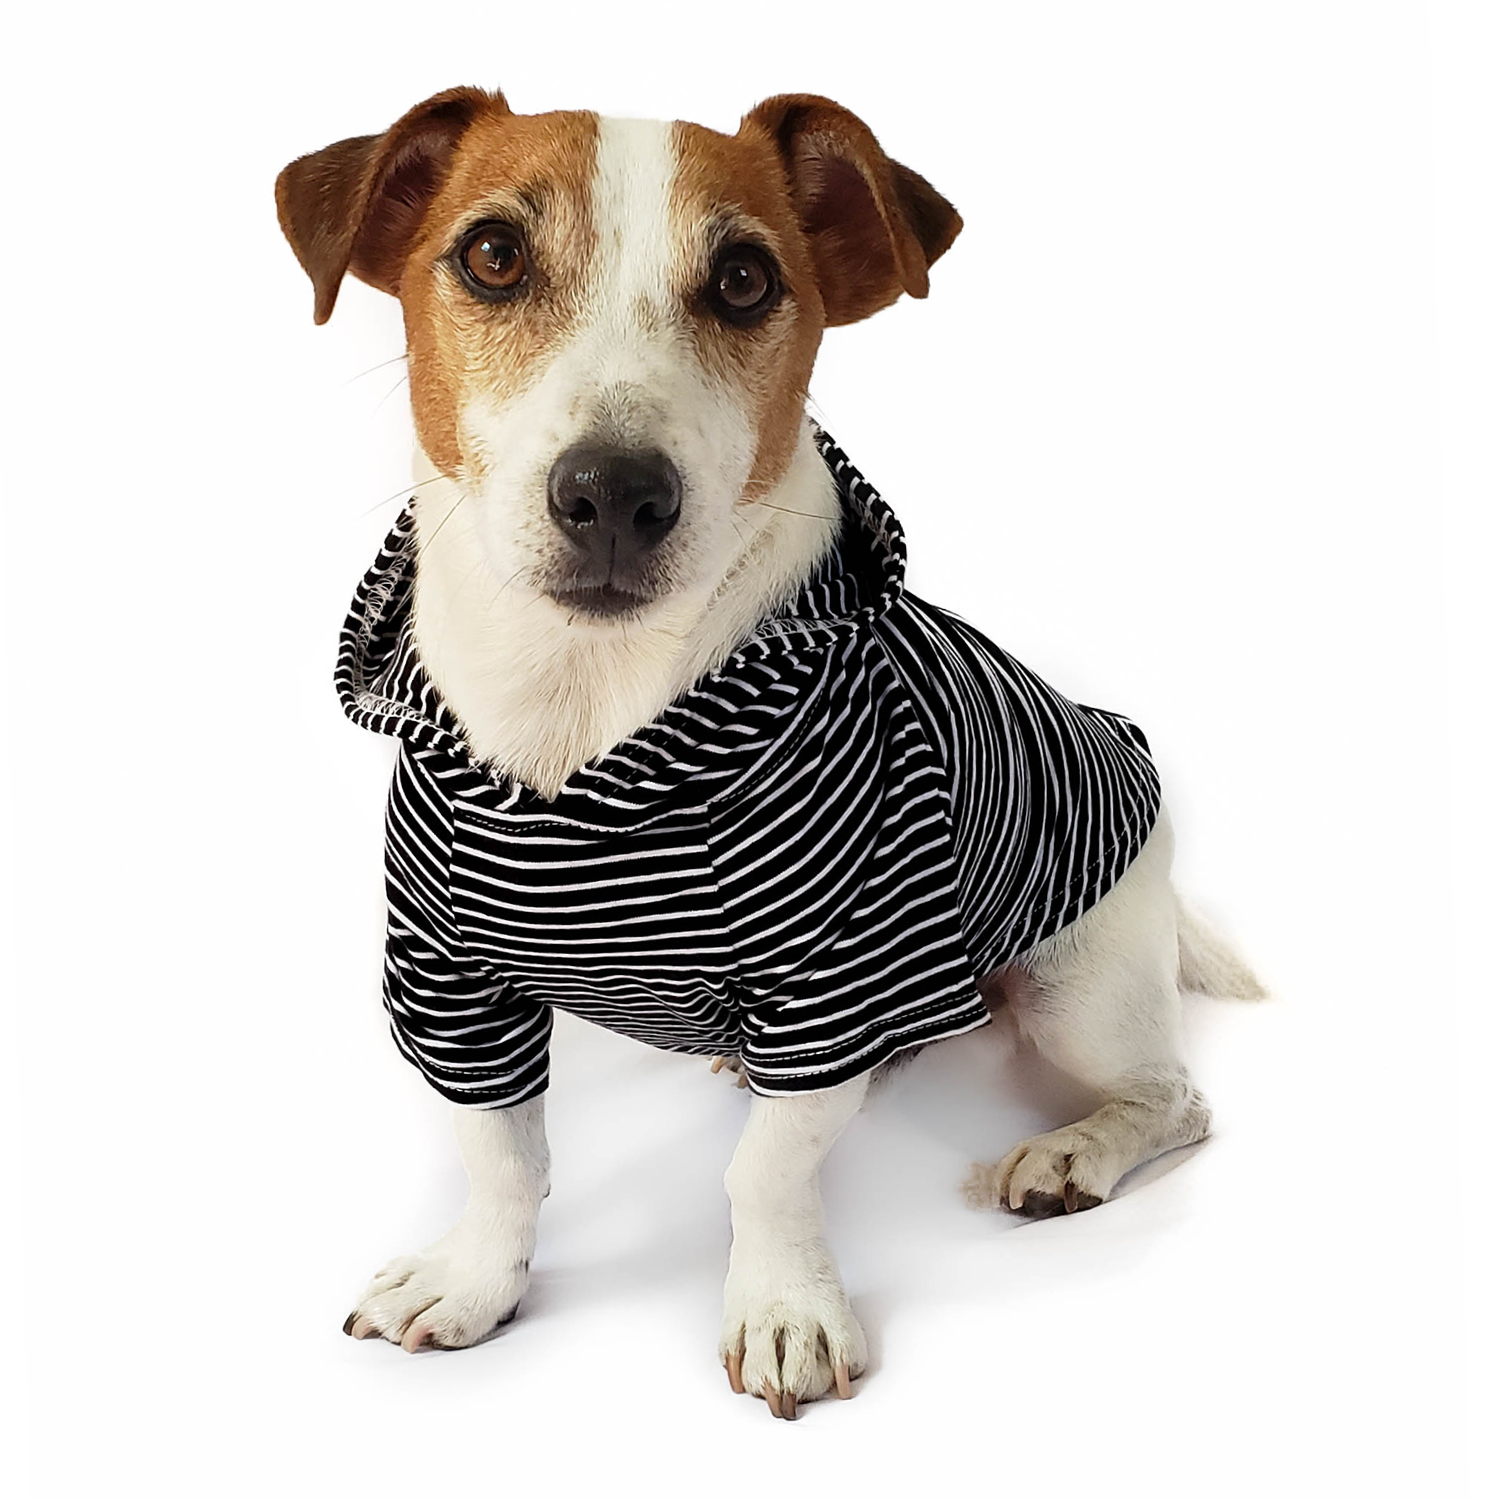 DJANGO Dog Hoodie in Black and White Stripes - Super soft, stretchy, and cozy dog sweater for puppies, small dogs, and medium dogs. Featuring a lined hood and elastic waist band. Machine washable - djangobrand.com